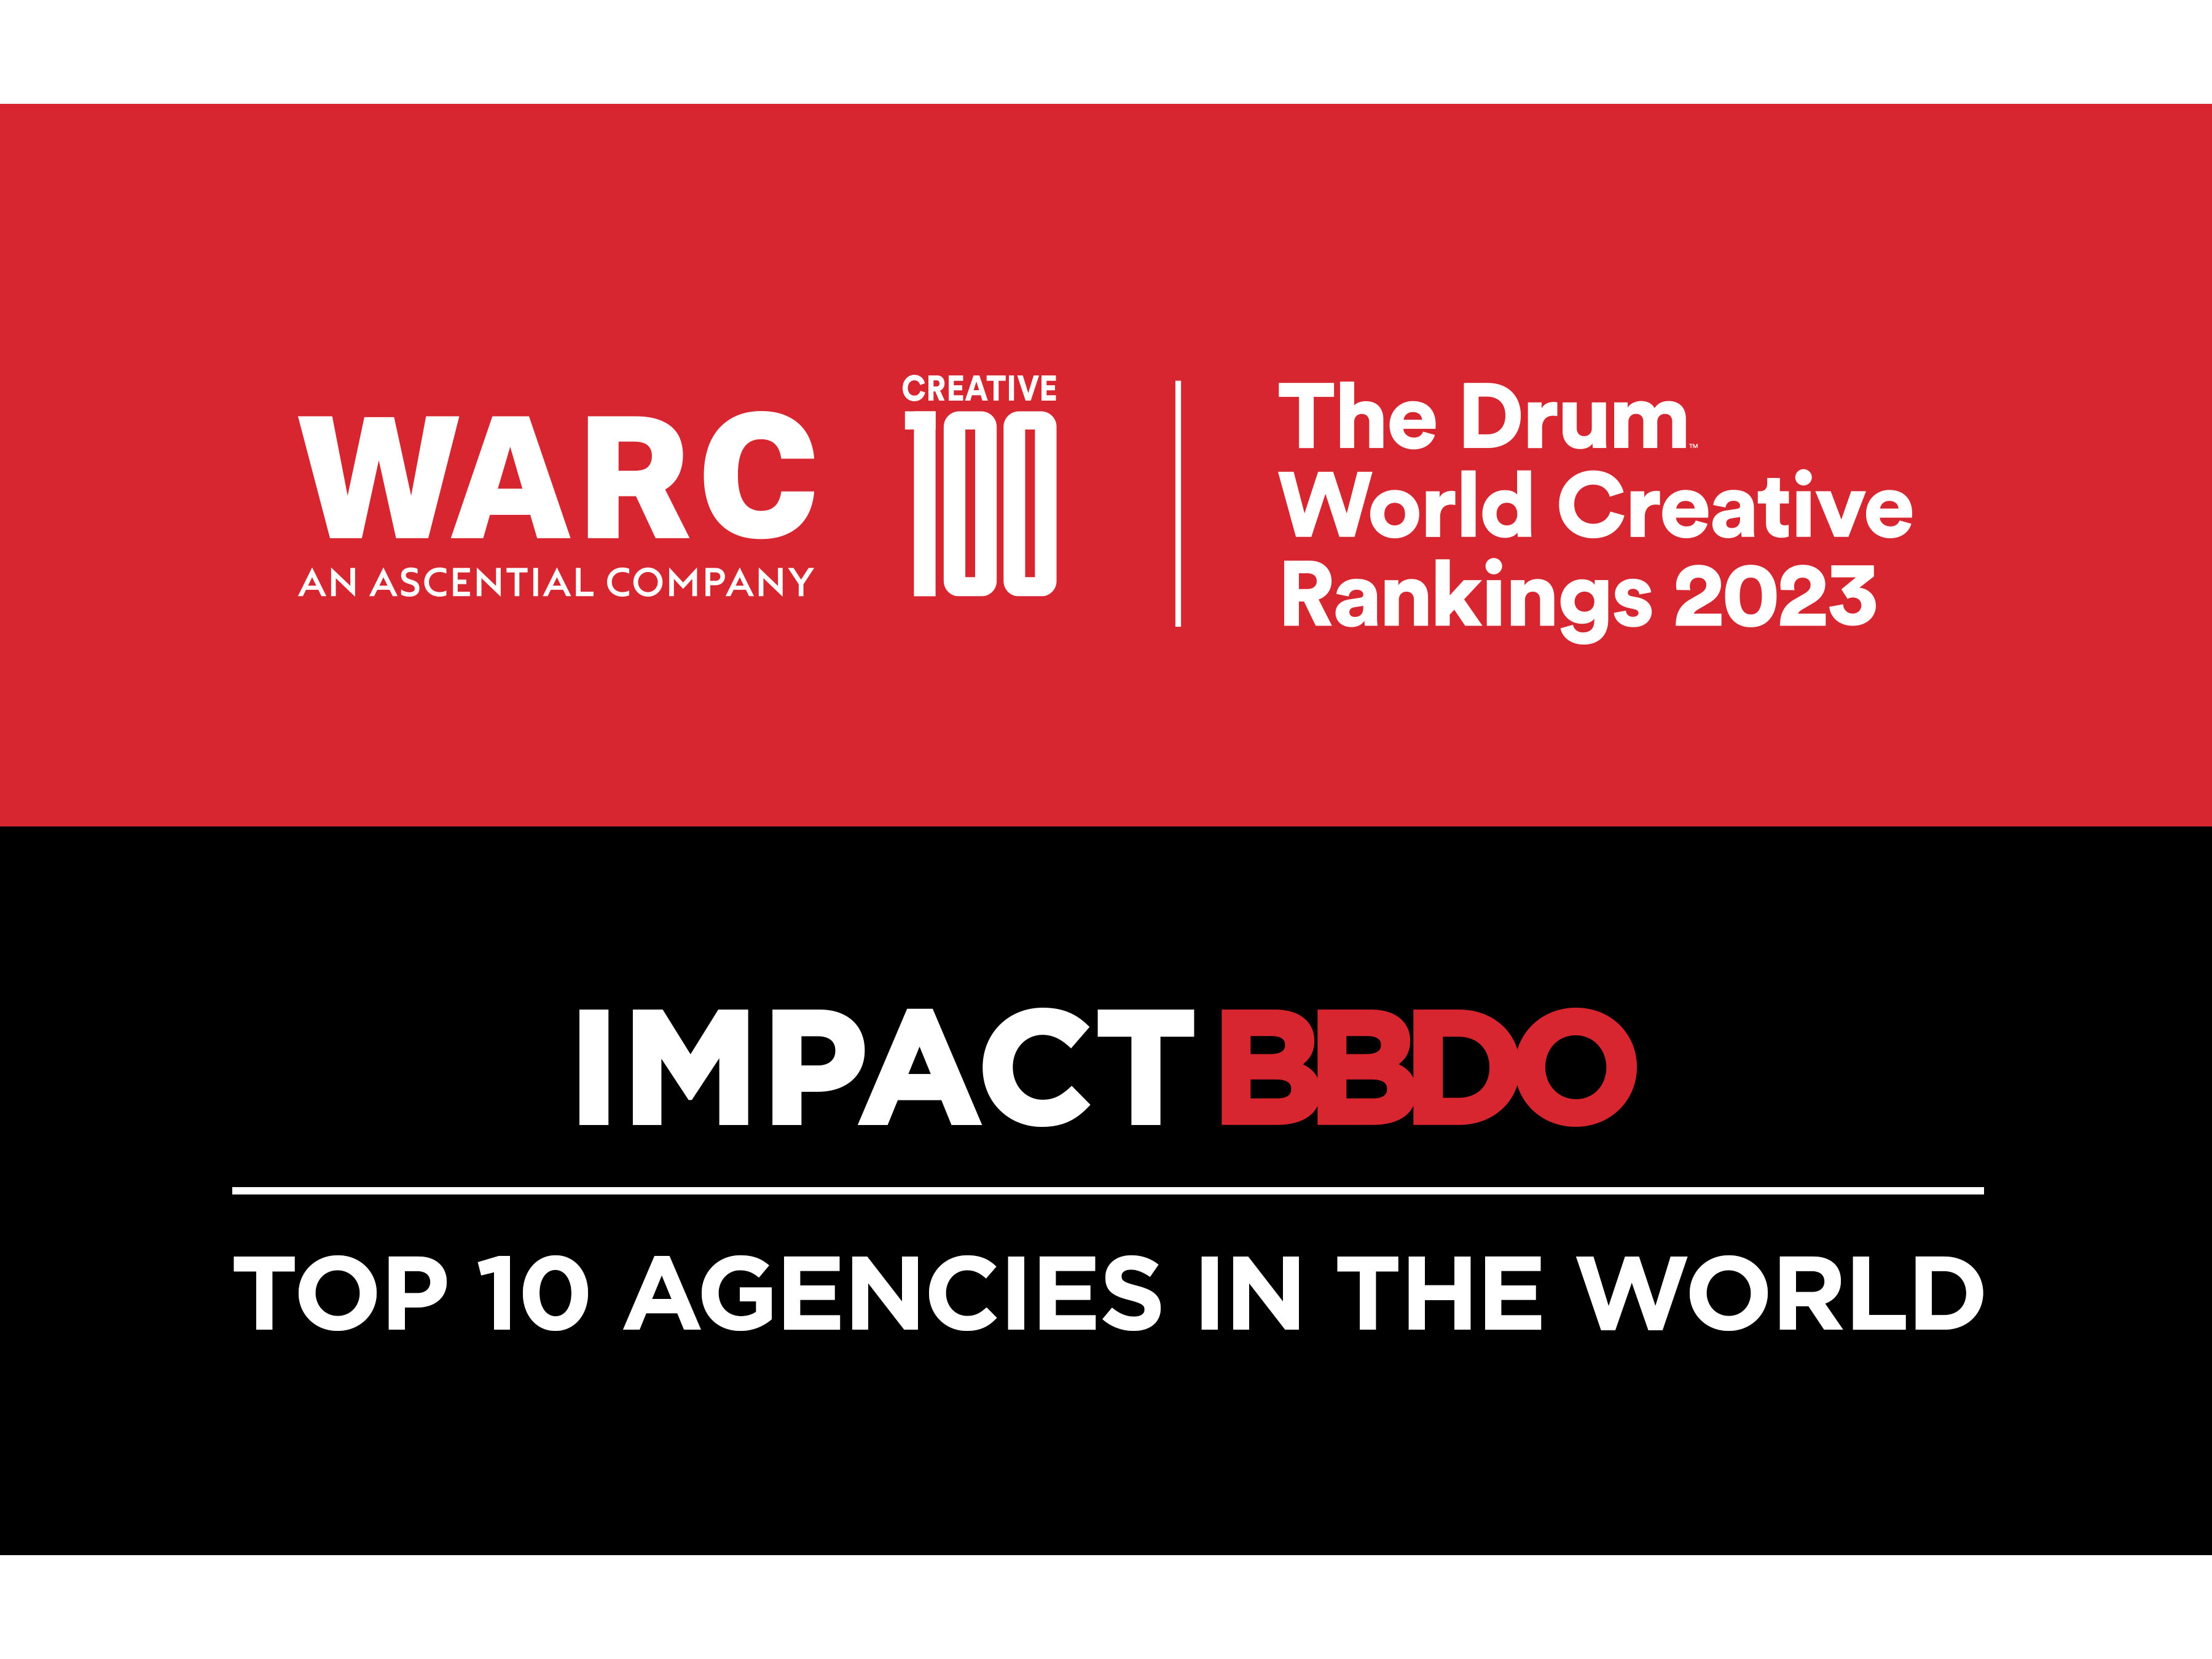 Arabad IMPACT BBDO first MENA agency in the Top 10 globally on both